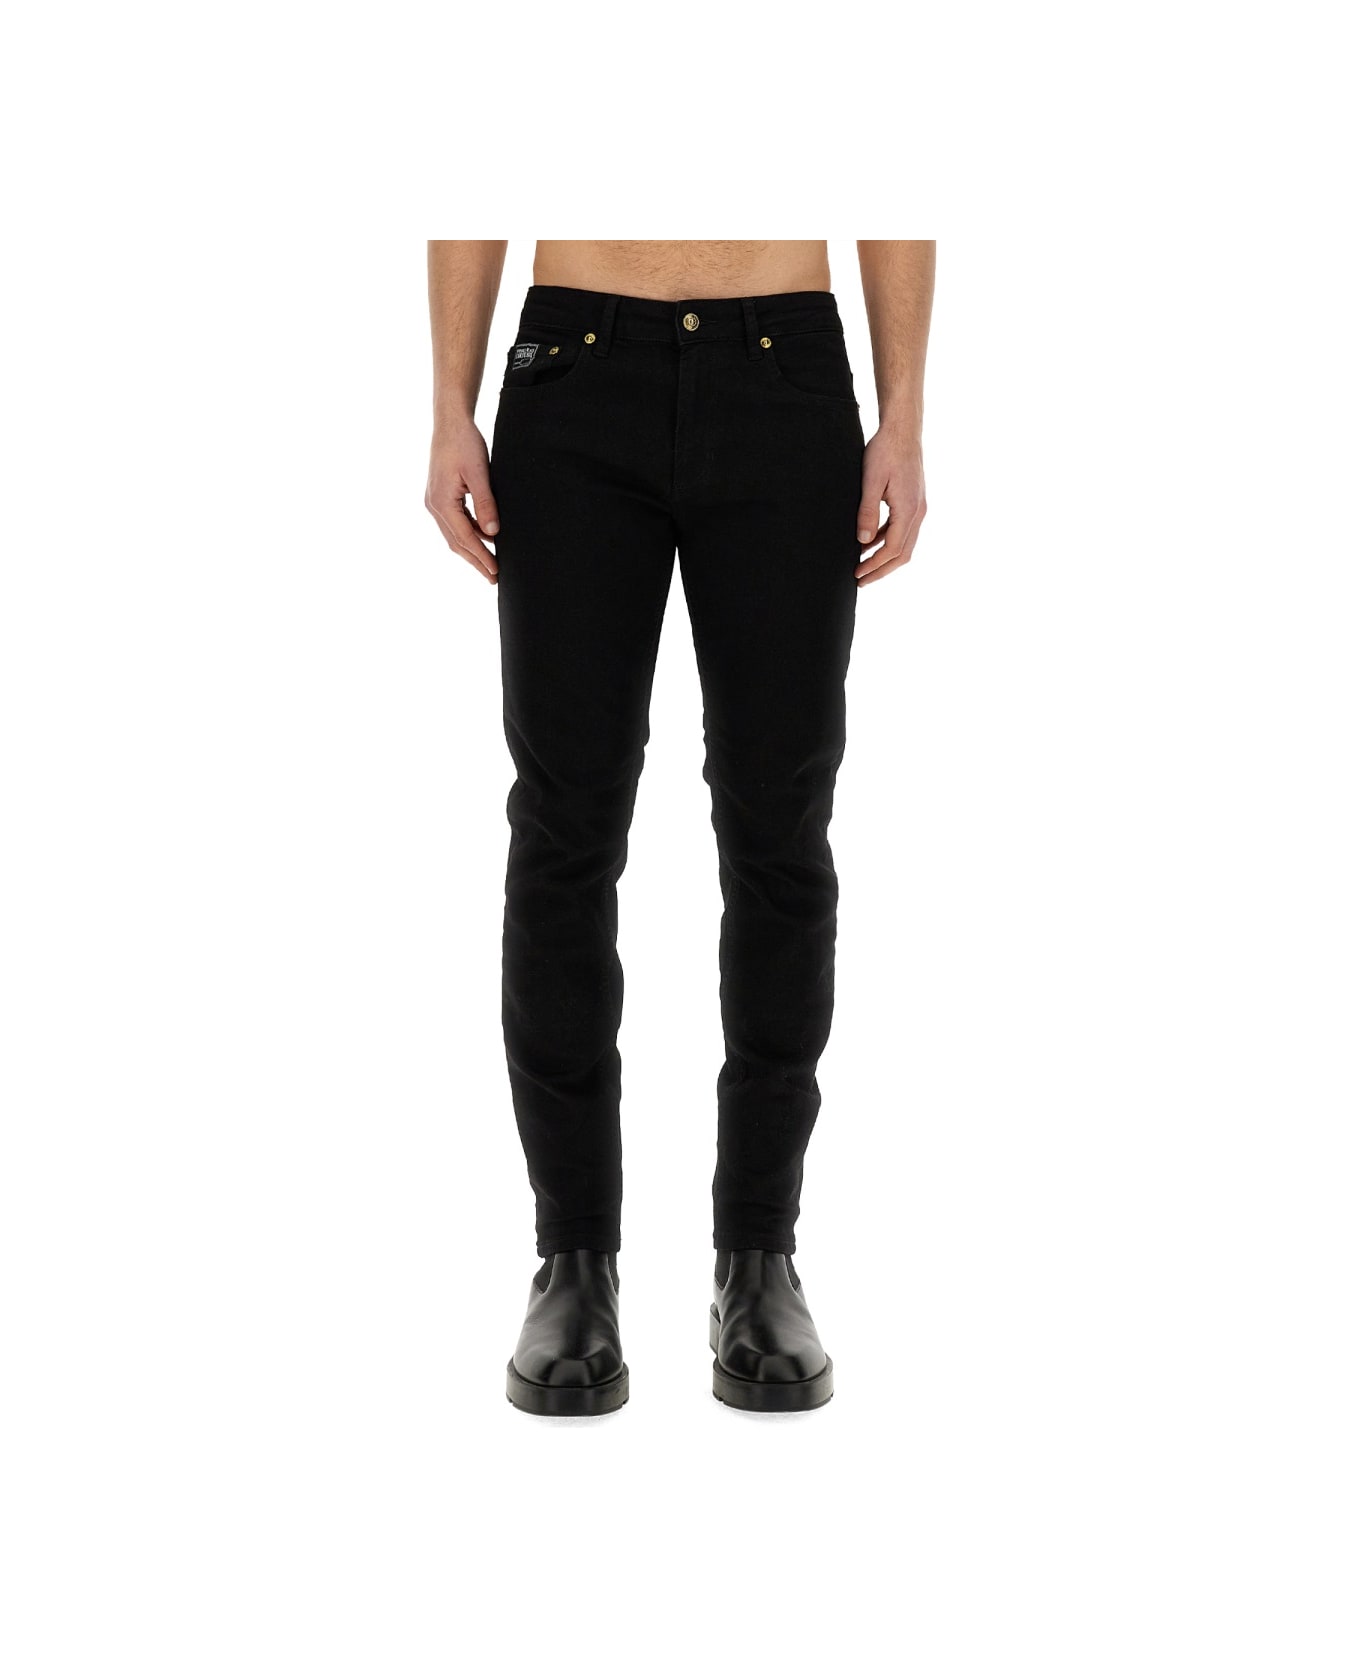 Versace Jeans Couture Slim Fit Jeans - Black デニム